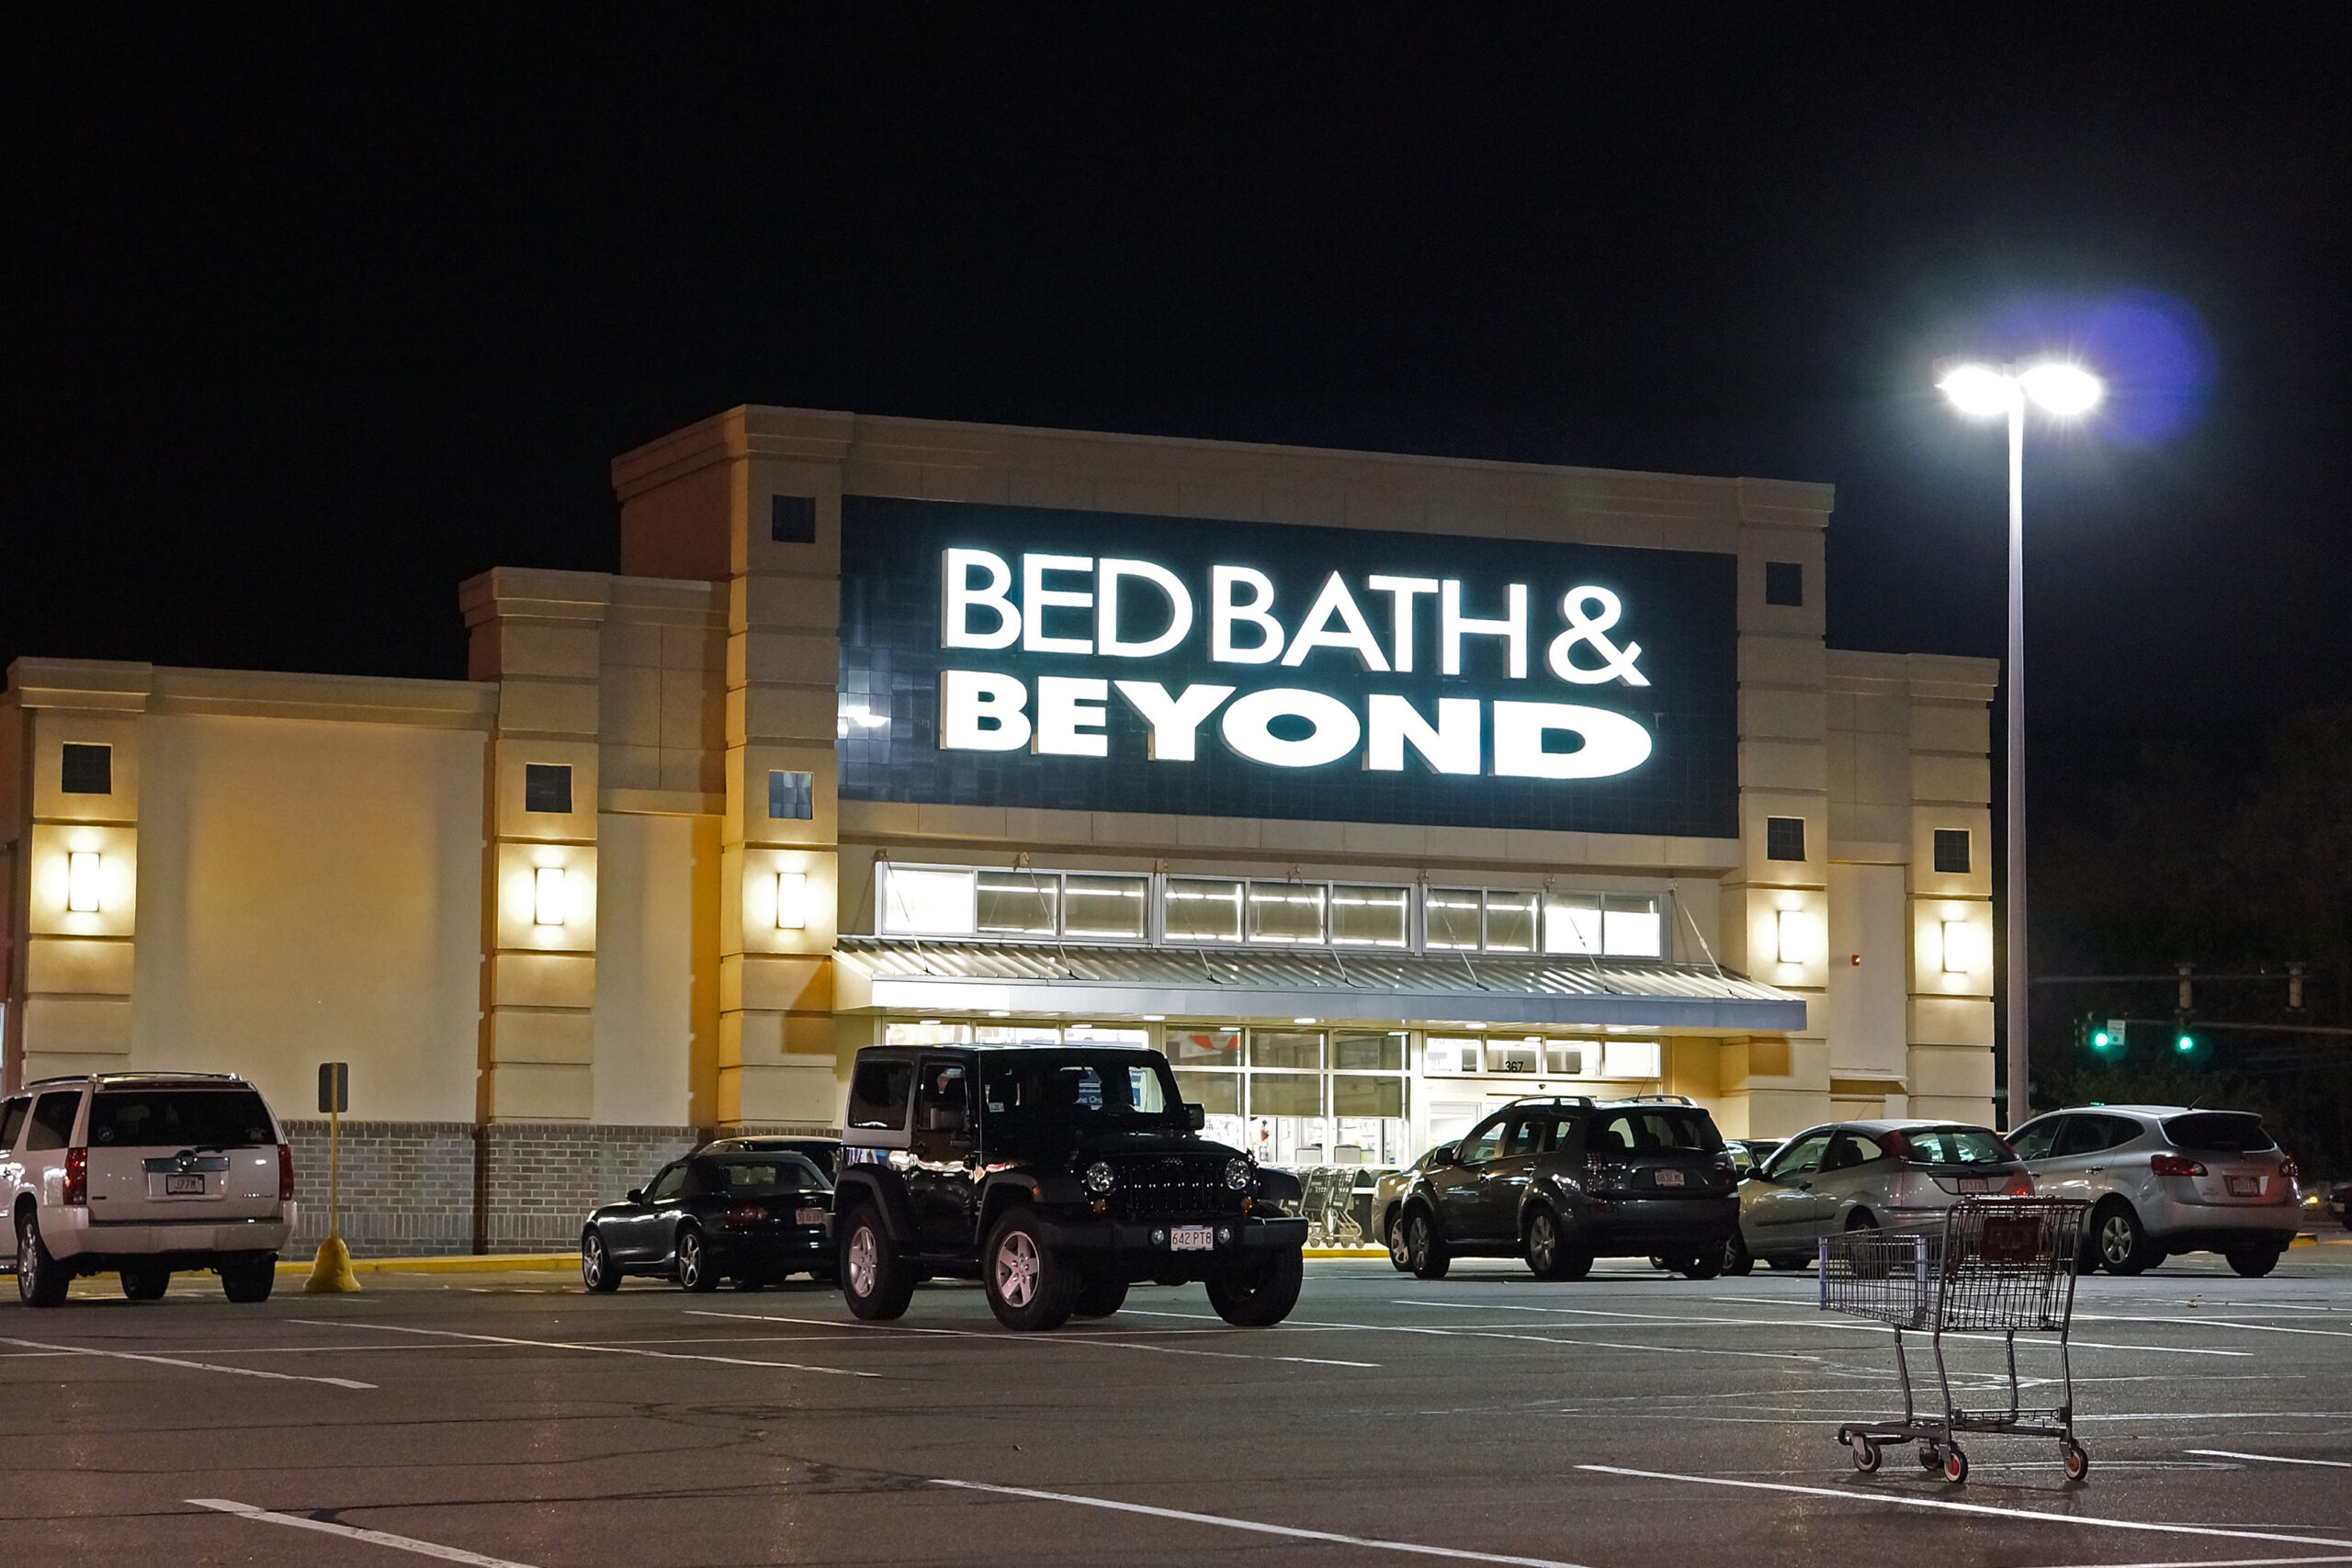 Bed Bath & Beyond, Toys ‘R’ Us and RadioShack all shut down for the same reason